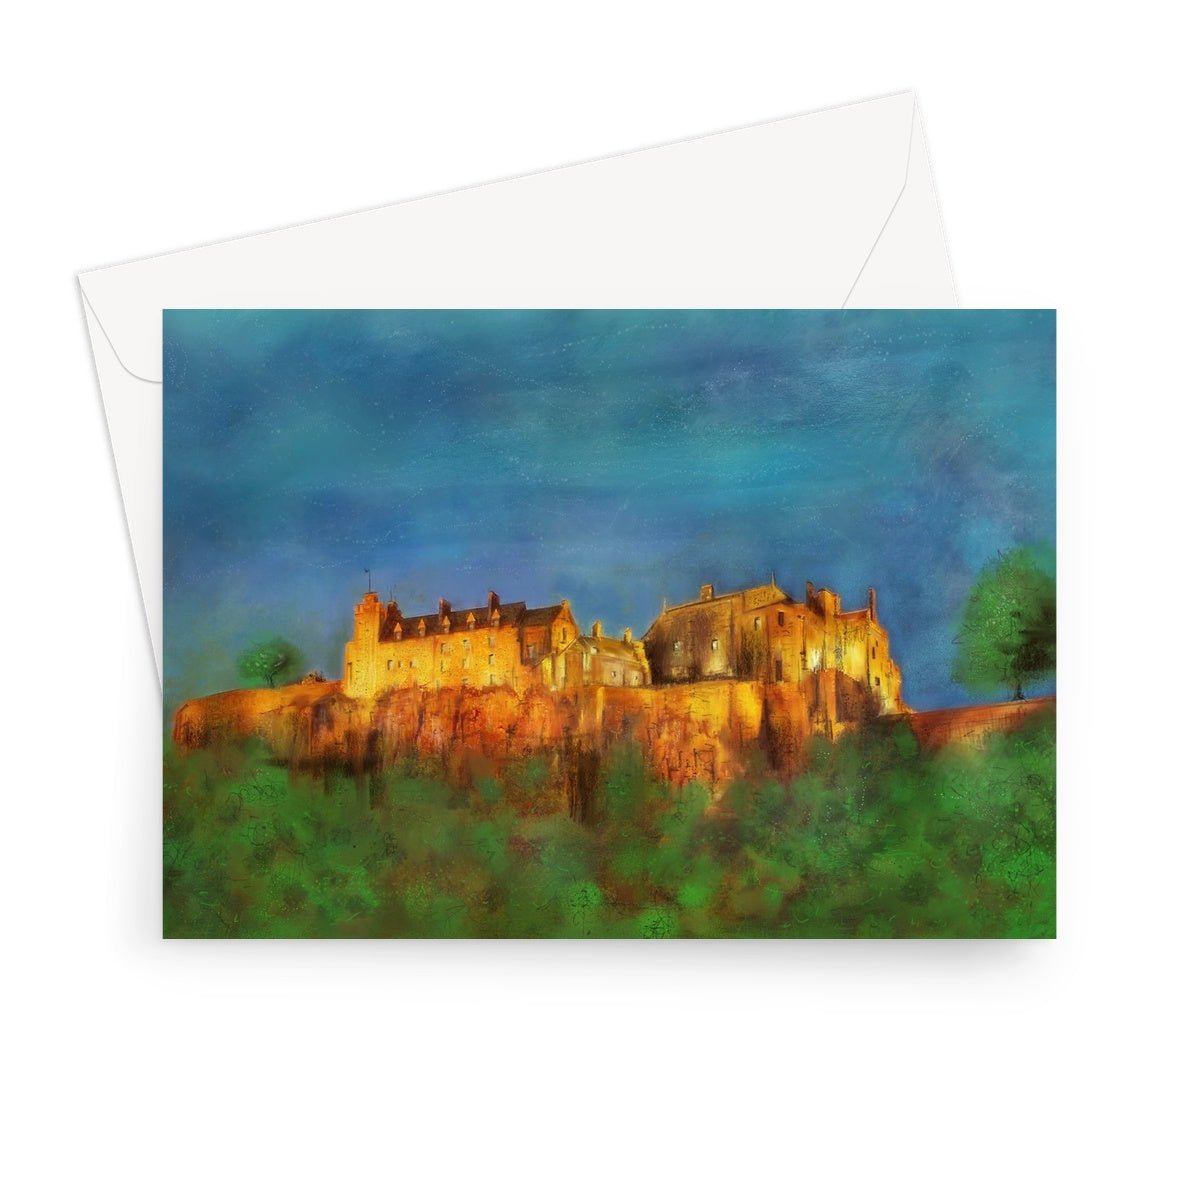 Stirling Castle Art Gifts Greeting Card-Greetings Cards-Historic & Iconic Scotland Art Gallery-7"x5"-1 Card-Paintings, Prints, Homeware, Art Gifts From Scotland By Scottish Artist Kevin Hunter